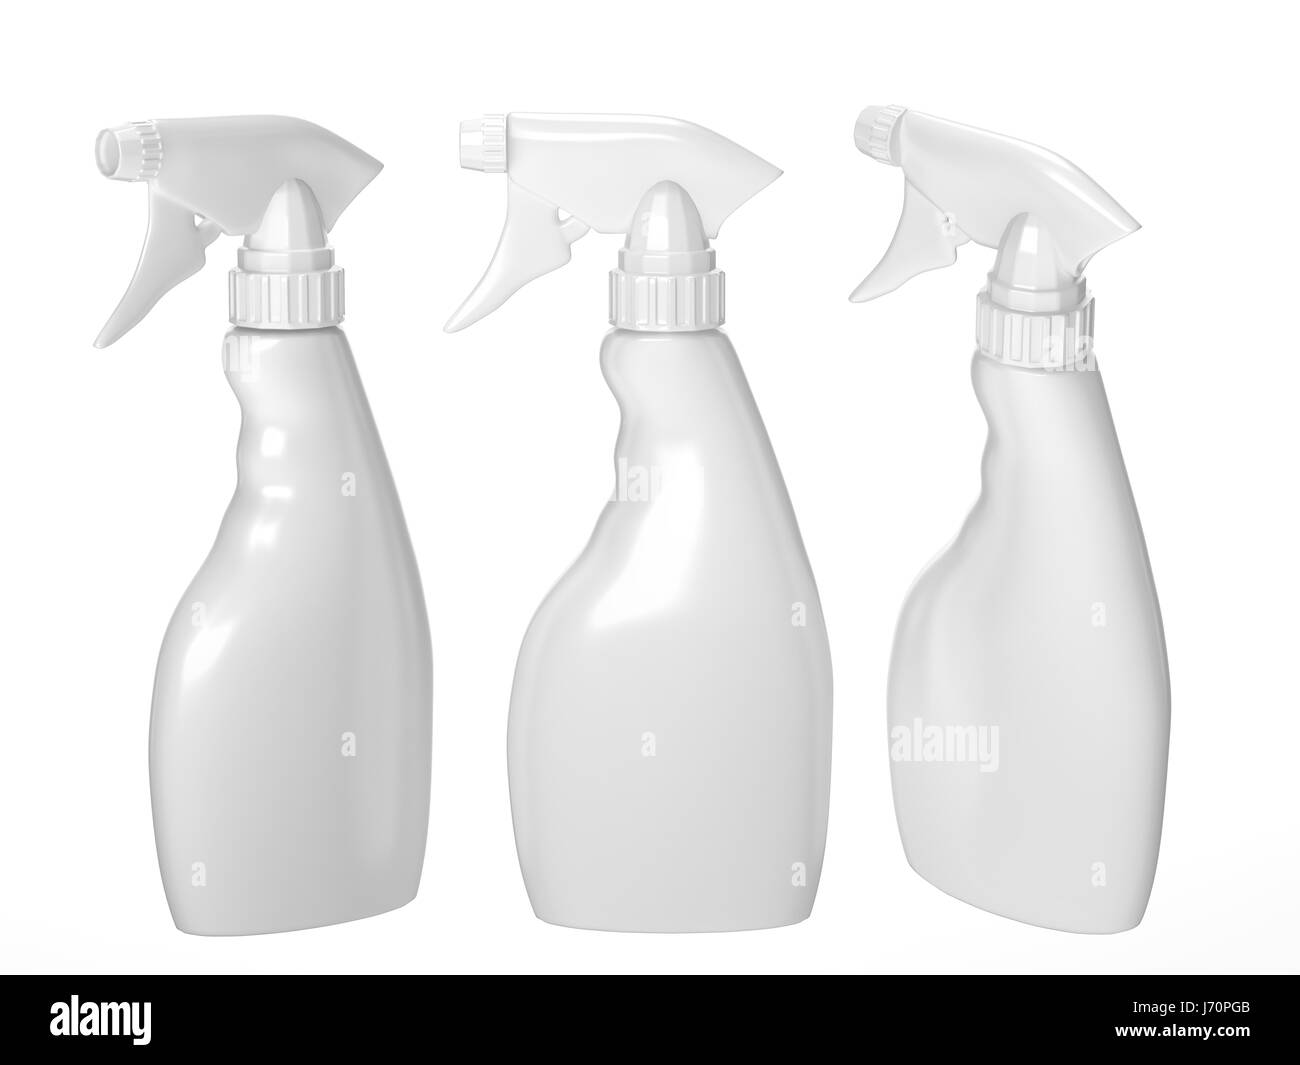 Blank spray bottle packaging with clipping path for liquid product like dish washing or ironing starch . ready for Your Design and artwork. Stock Photo